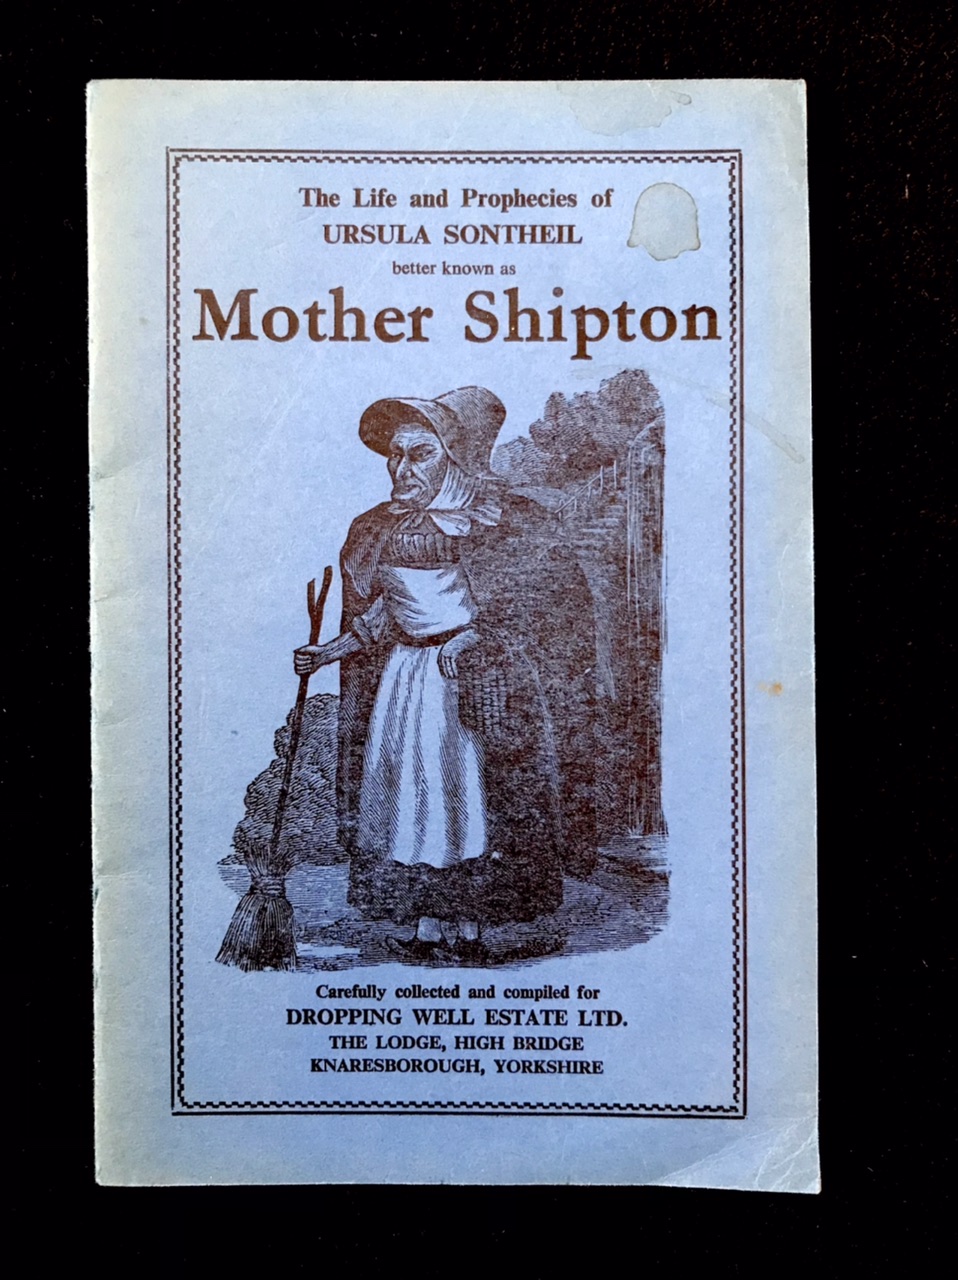 The Life & Prophecies of Ursula Sontheil, Mother Shipton